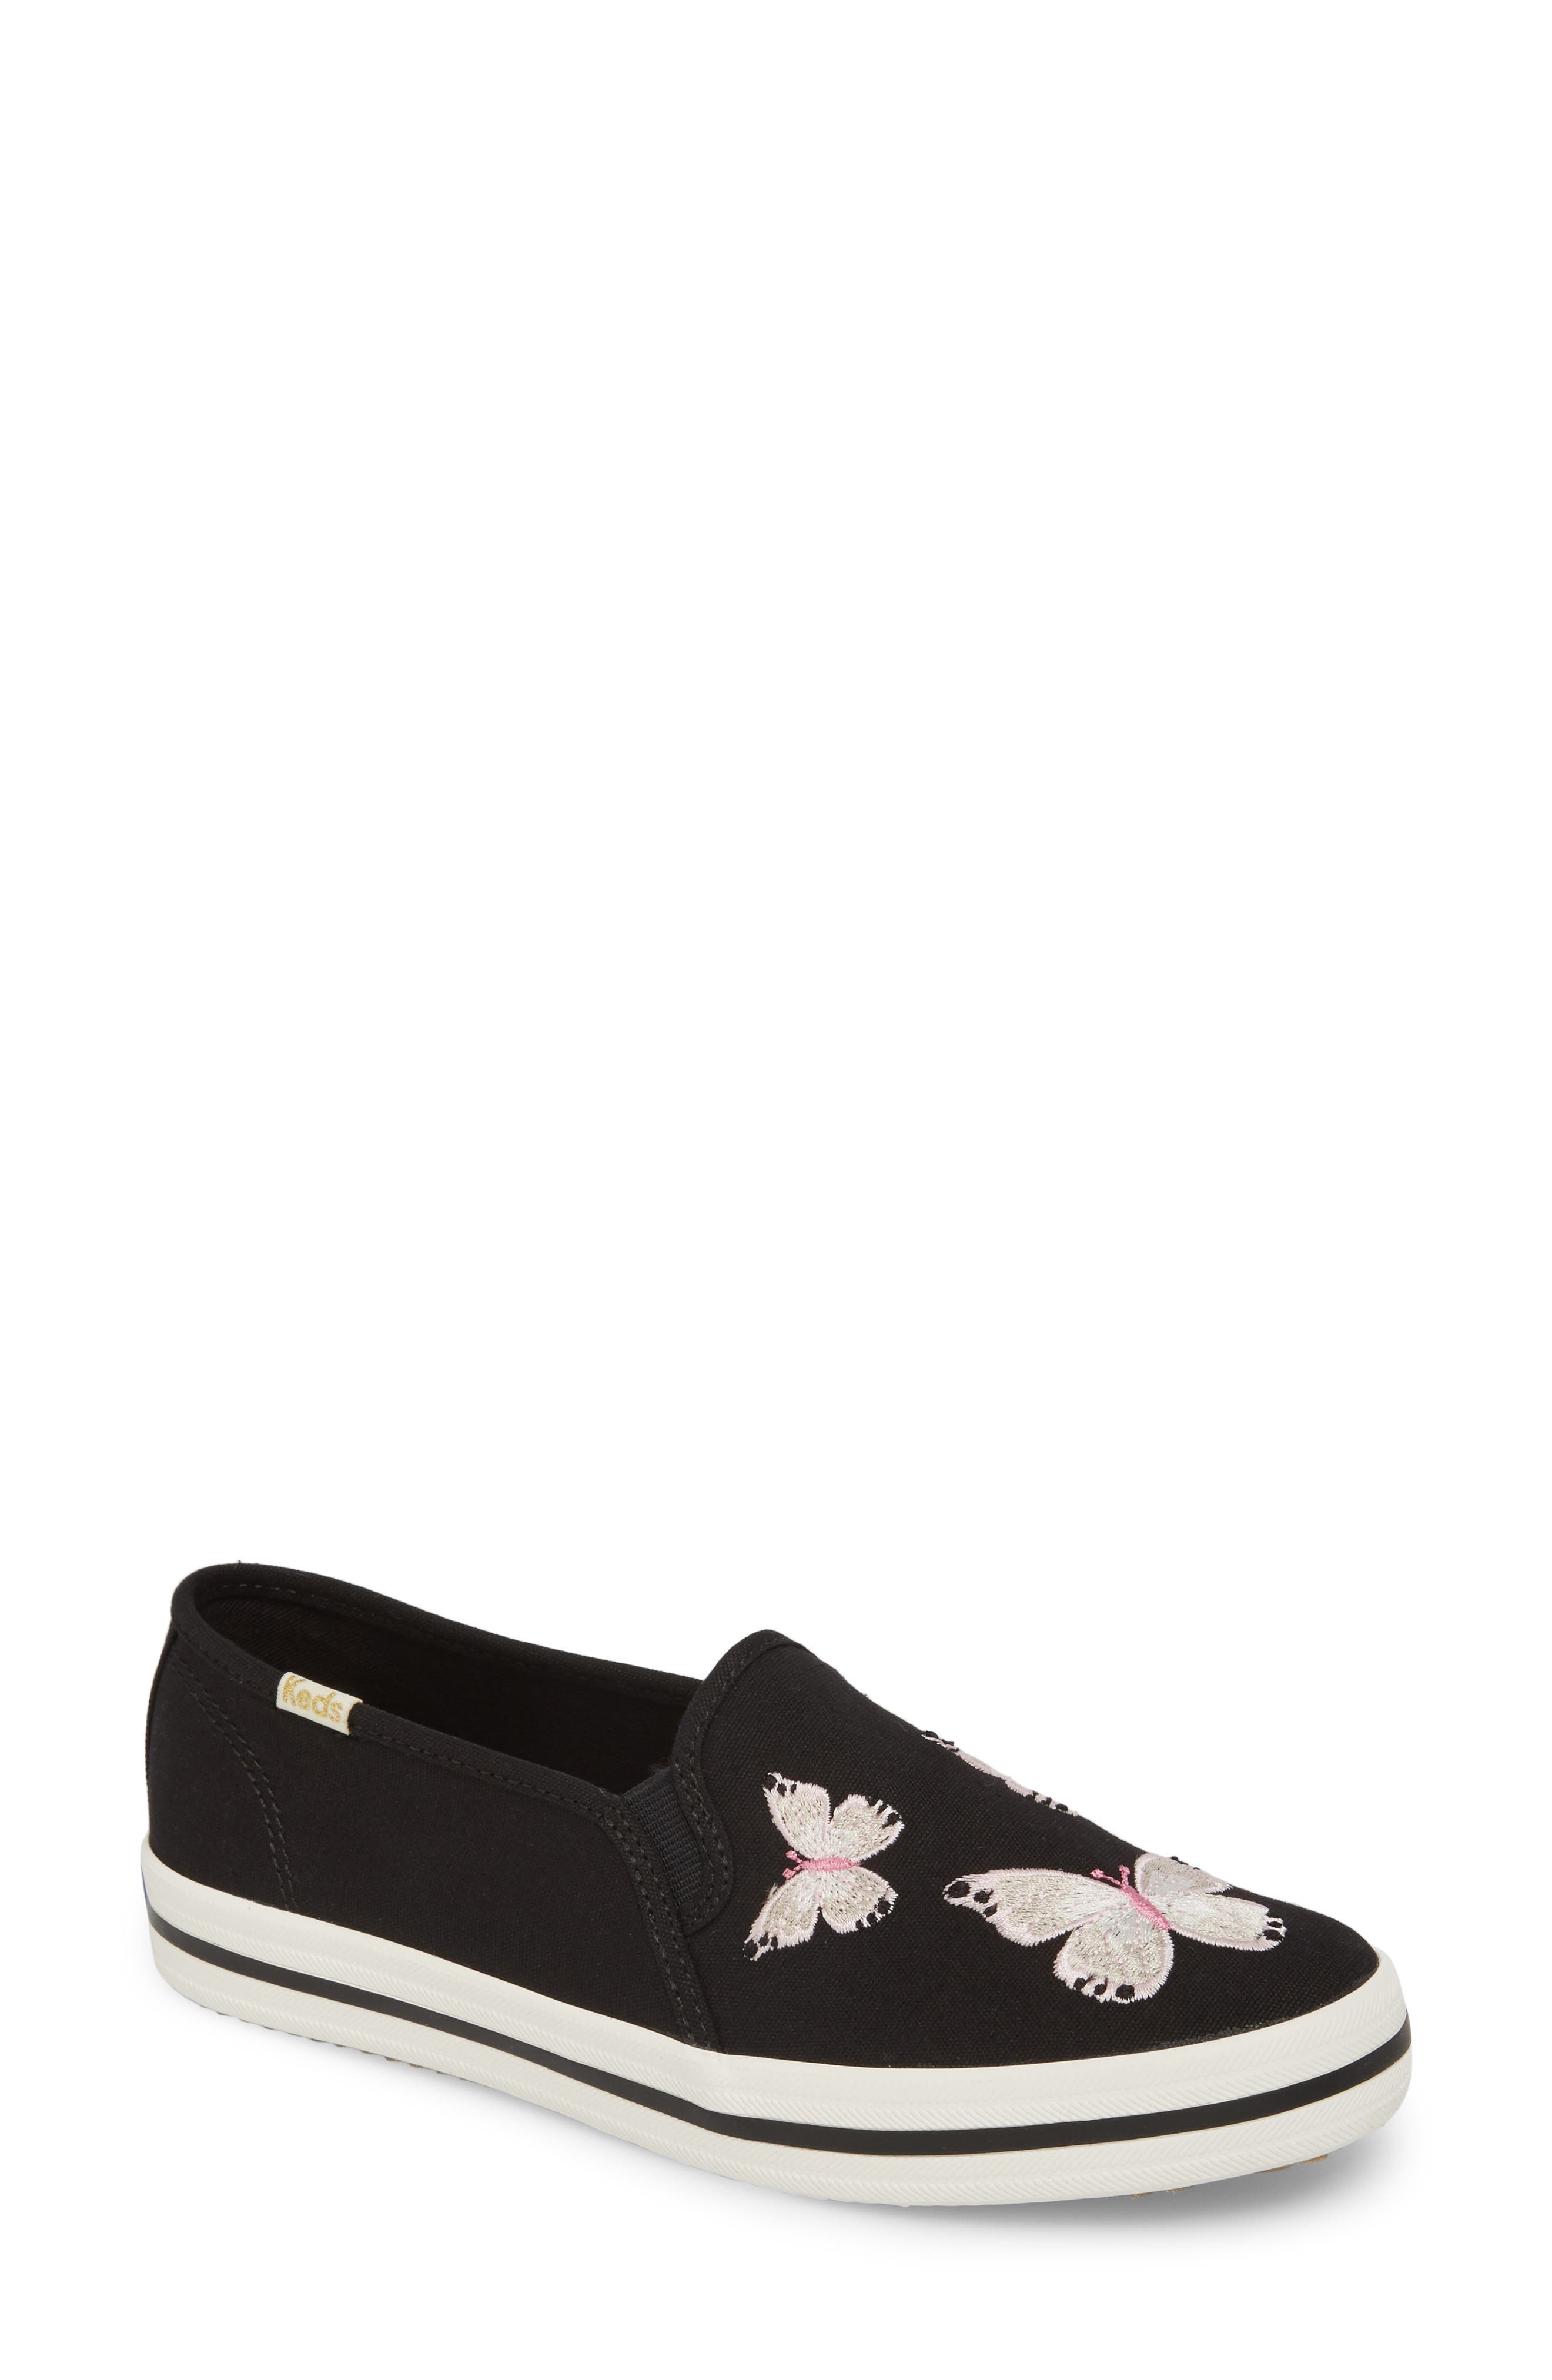 keds butterfly shoes